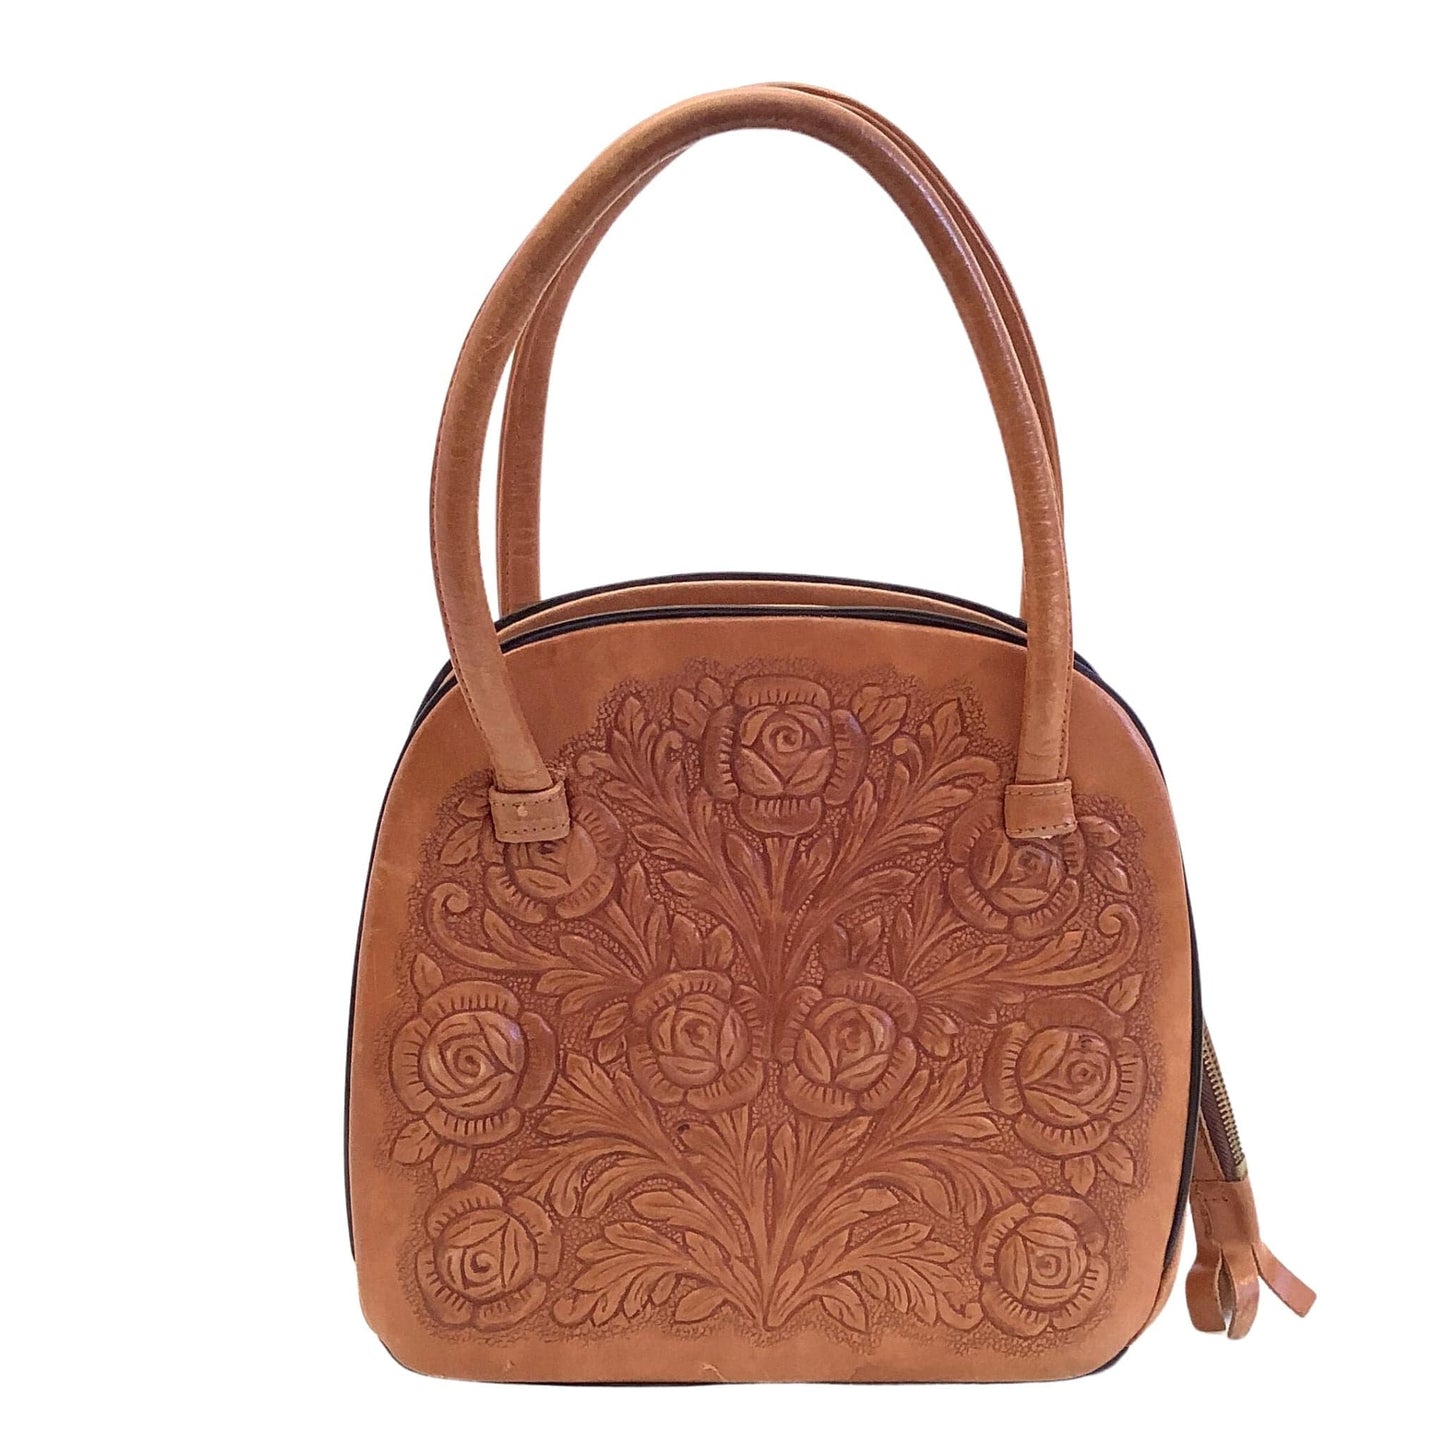 Tooled Leather Floral Purse Tan / Leather / Vintage 1960s